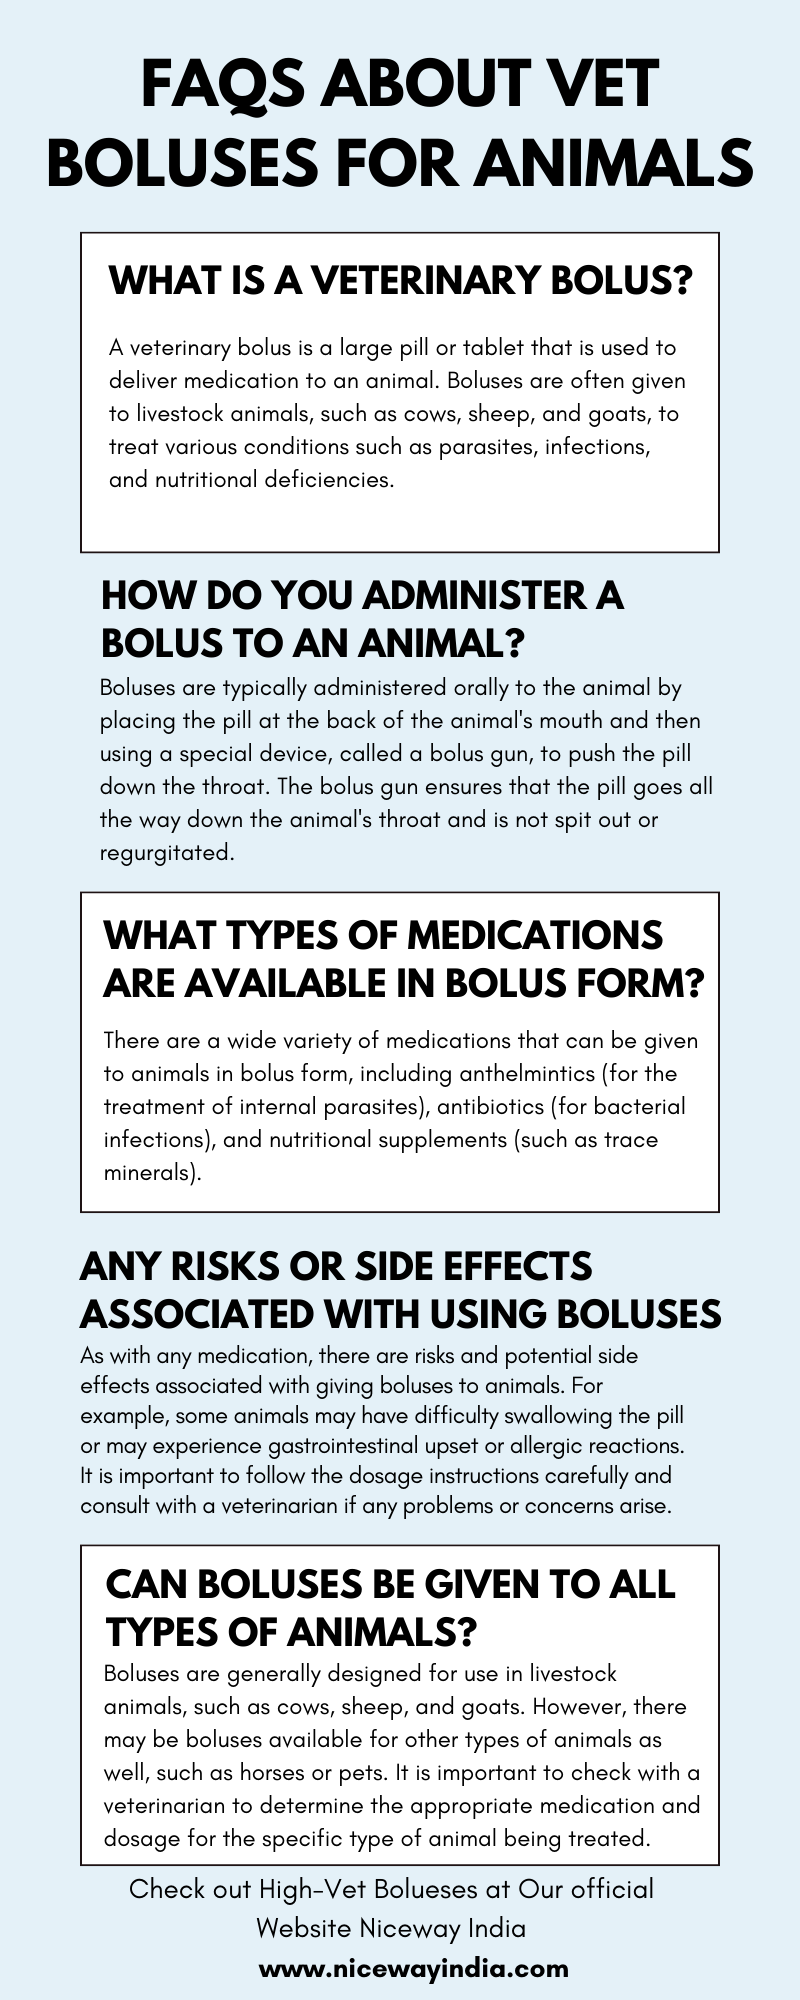 FAQS ABOUT VET
BOLUSES FOR ANIMALS

WHAT IS A VETERINARY BOLUS?

A veterinary bolus is a large pill or tablet that is used to

 

deliver medication to an animal. Boluses are often given
to livestock animals, such as cows, sheep, and goats, to
treat various conditions such as parasites, nfections,

and nutritional deficiencies

 

 

 

HOW DO YOU ADMINISTER A
BOLUS TO AN ANIMAL?

Boluses are typically administered orally to the animal by
placing the pill at the back of the animal's mouth and then
using a special device, called a bolus gun, to push the pill
down the throat. The bolus gun ensures that the pill goes all
the way down the animal's throat and is not spit out or
regurgitated

WHAT TYPES OF MEDICATIONS
ARE AVAILABLE IN BOLUS FORM?

There are a wide variety of medications that can be given
to animals in bolus form, including anthelmintics (for the
treatment of internal parasites), antibiotics (for bacterial
infections), and nutritional supplements (such as trace

minerals)

 

ANY RISKS OR SIDE EFFECTS
ASSOCIATED WITH USING BOLUSES

As with any medication, there are risks and potential side
effects associated with giving boluses to animals. For
example, some animals may have difficulty swallowing the pill
or may experience gastrointestinal upset or allergic reactions
It is important to follow the dosage instructions carefully and
consult with a veterinarian if any problems or concerns arise.

CAN BOLUSES BE GIVEN TO ALL
TYPES OF ANIMALS?

Boluses are generally designed for use in livestock
animals, such as cows, sheep, and goats. However, there
may be boluses available for other types of animals as
well, such as horses or pets. It is important to check with a
veterinarian to determine the appropriate medication and
dosage for the specific type of animal being treated

 

Check out High-Vet Bolueses at Our official
Website Niceway India
www.nicewayindia.com